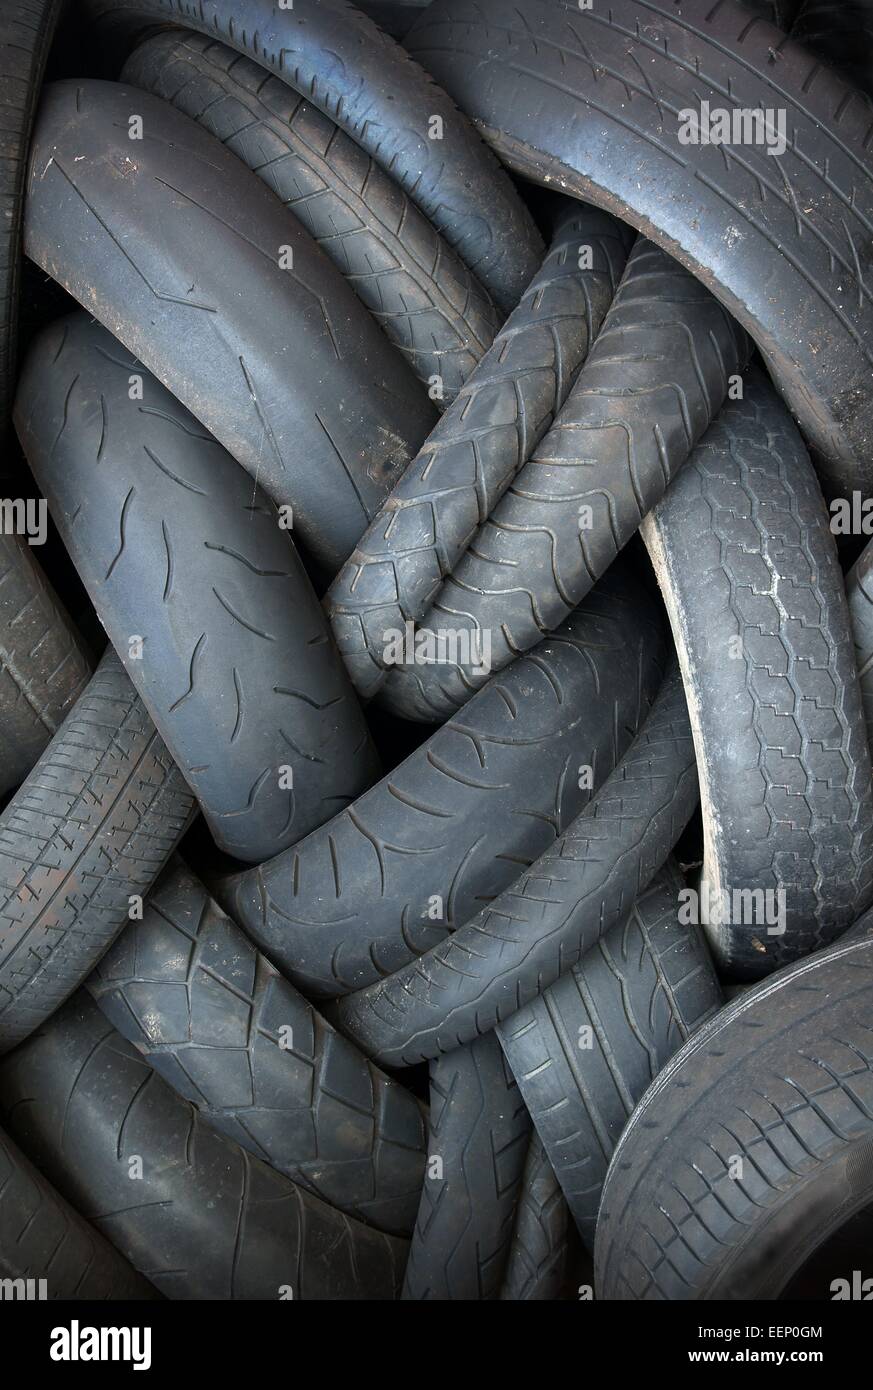 Pile of old worn out tires for recycling Stock Photo